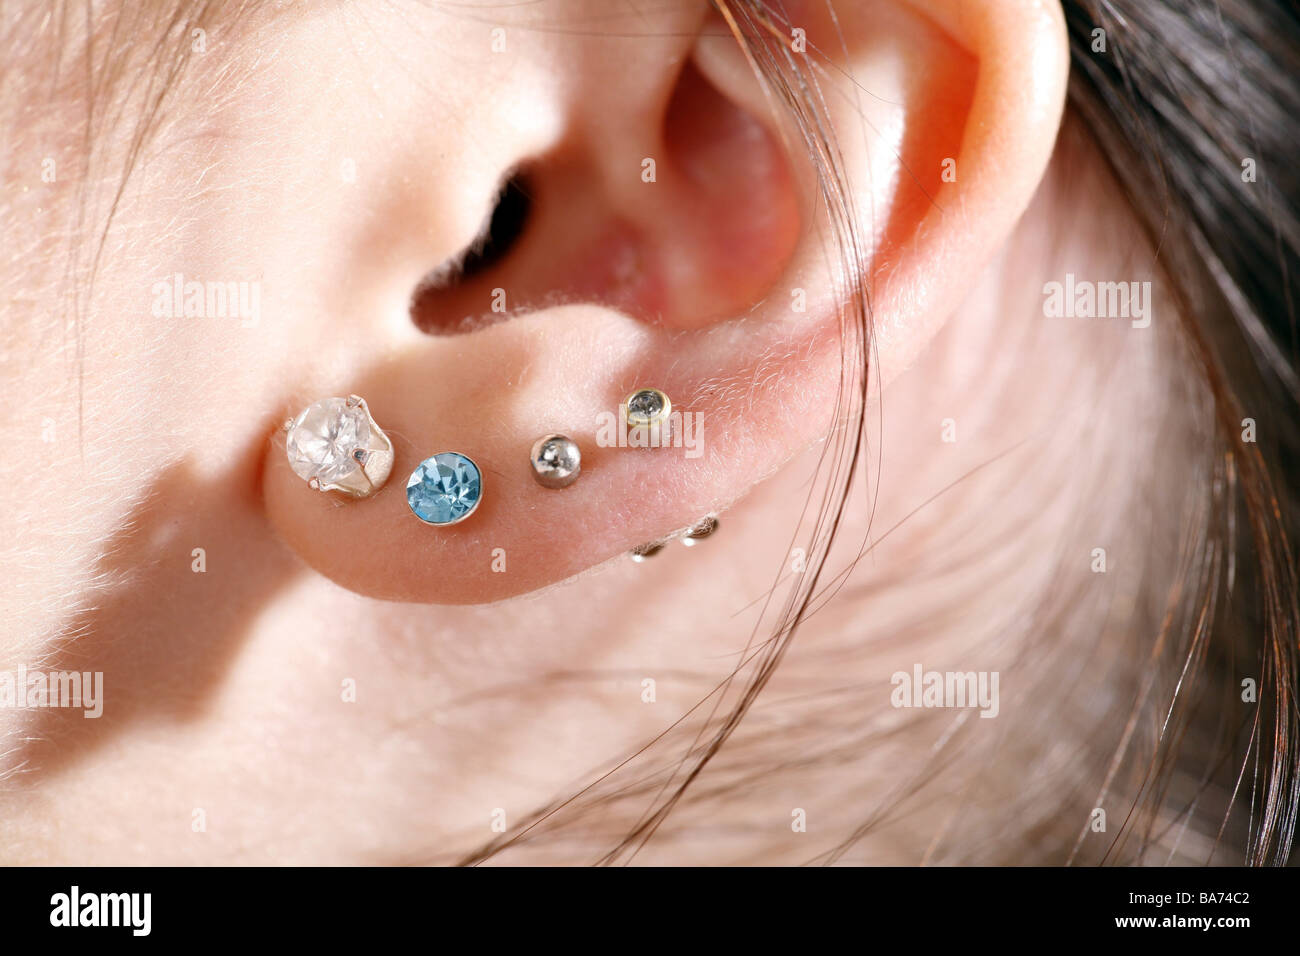 Broached woman young ear studs Stock Photo